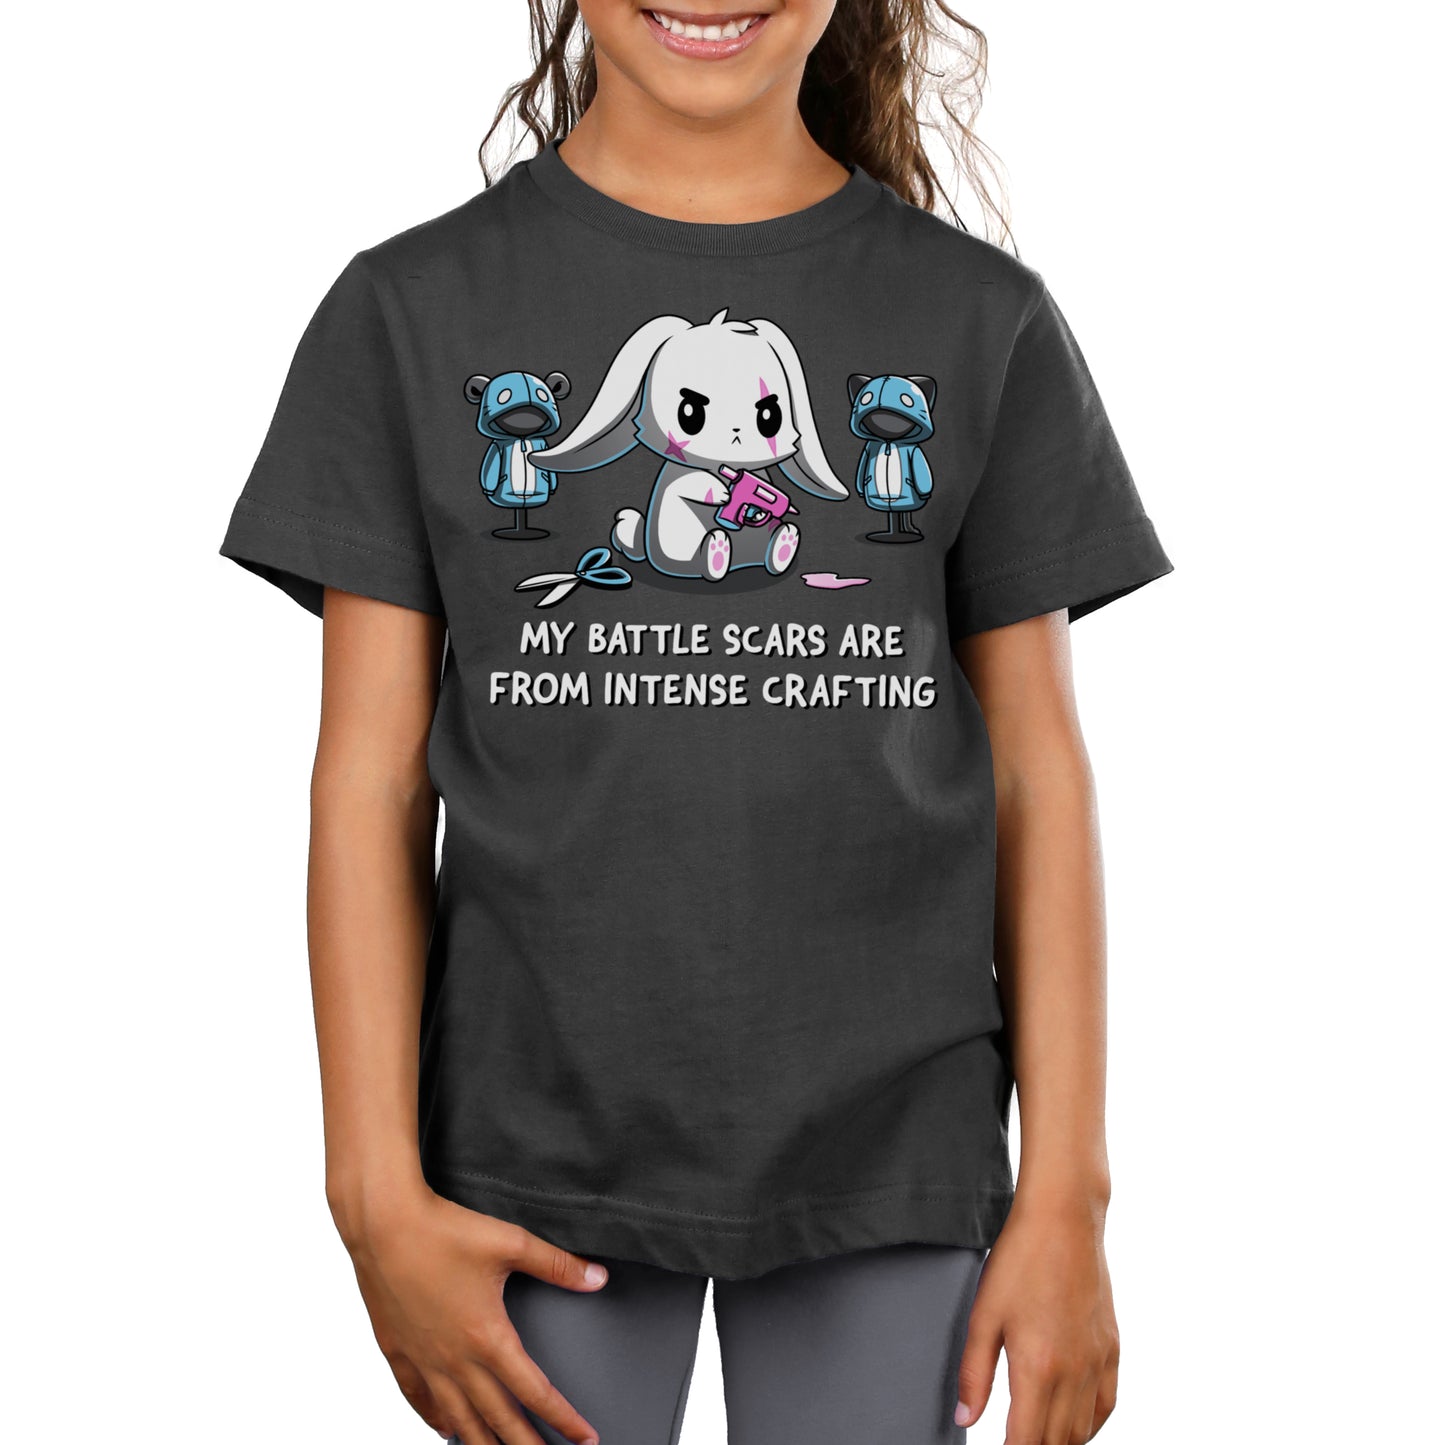 Premium Cotton T-shirt - A child wearing a charcoal gray crafting apparel featuring an illustration of a bunny sewing stuffed animals. Made from super soft ringspun cotton, the apparel text reads, "My battle scars are from intense crafting." The product is "Battle Scars" by monsterdigital.